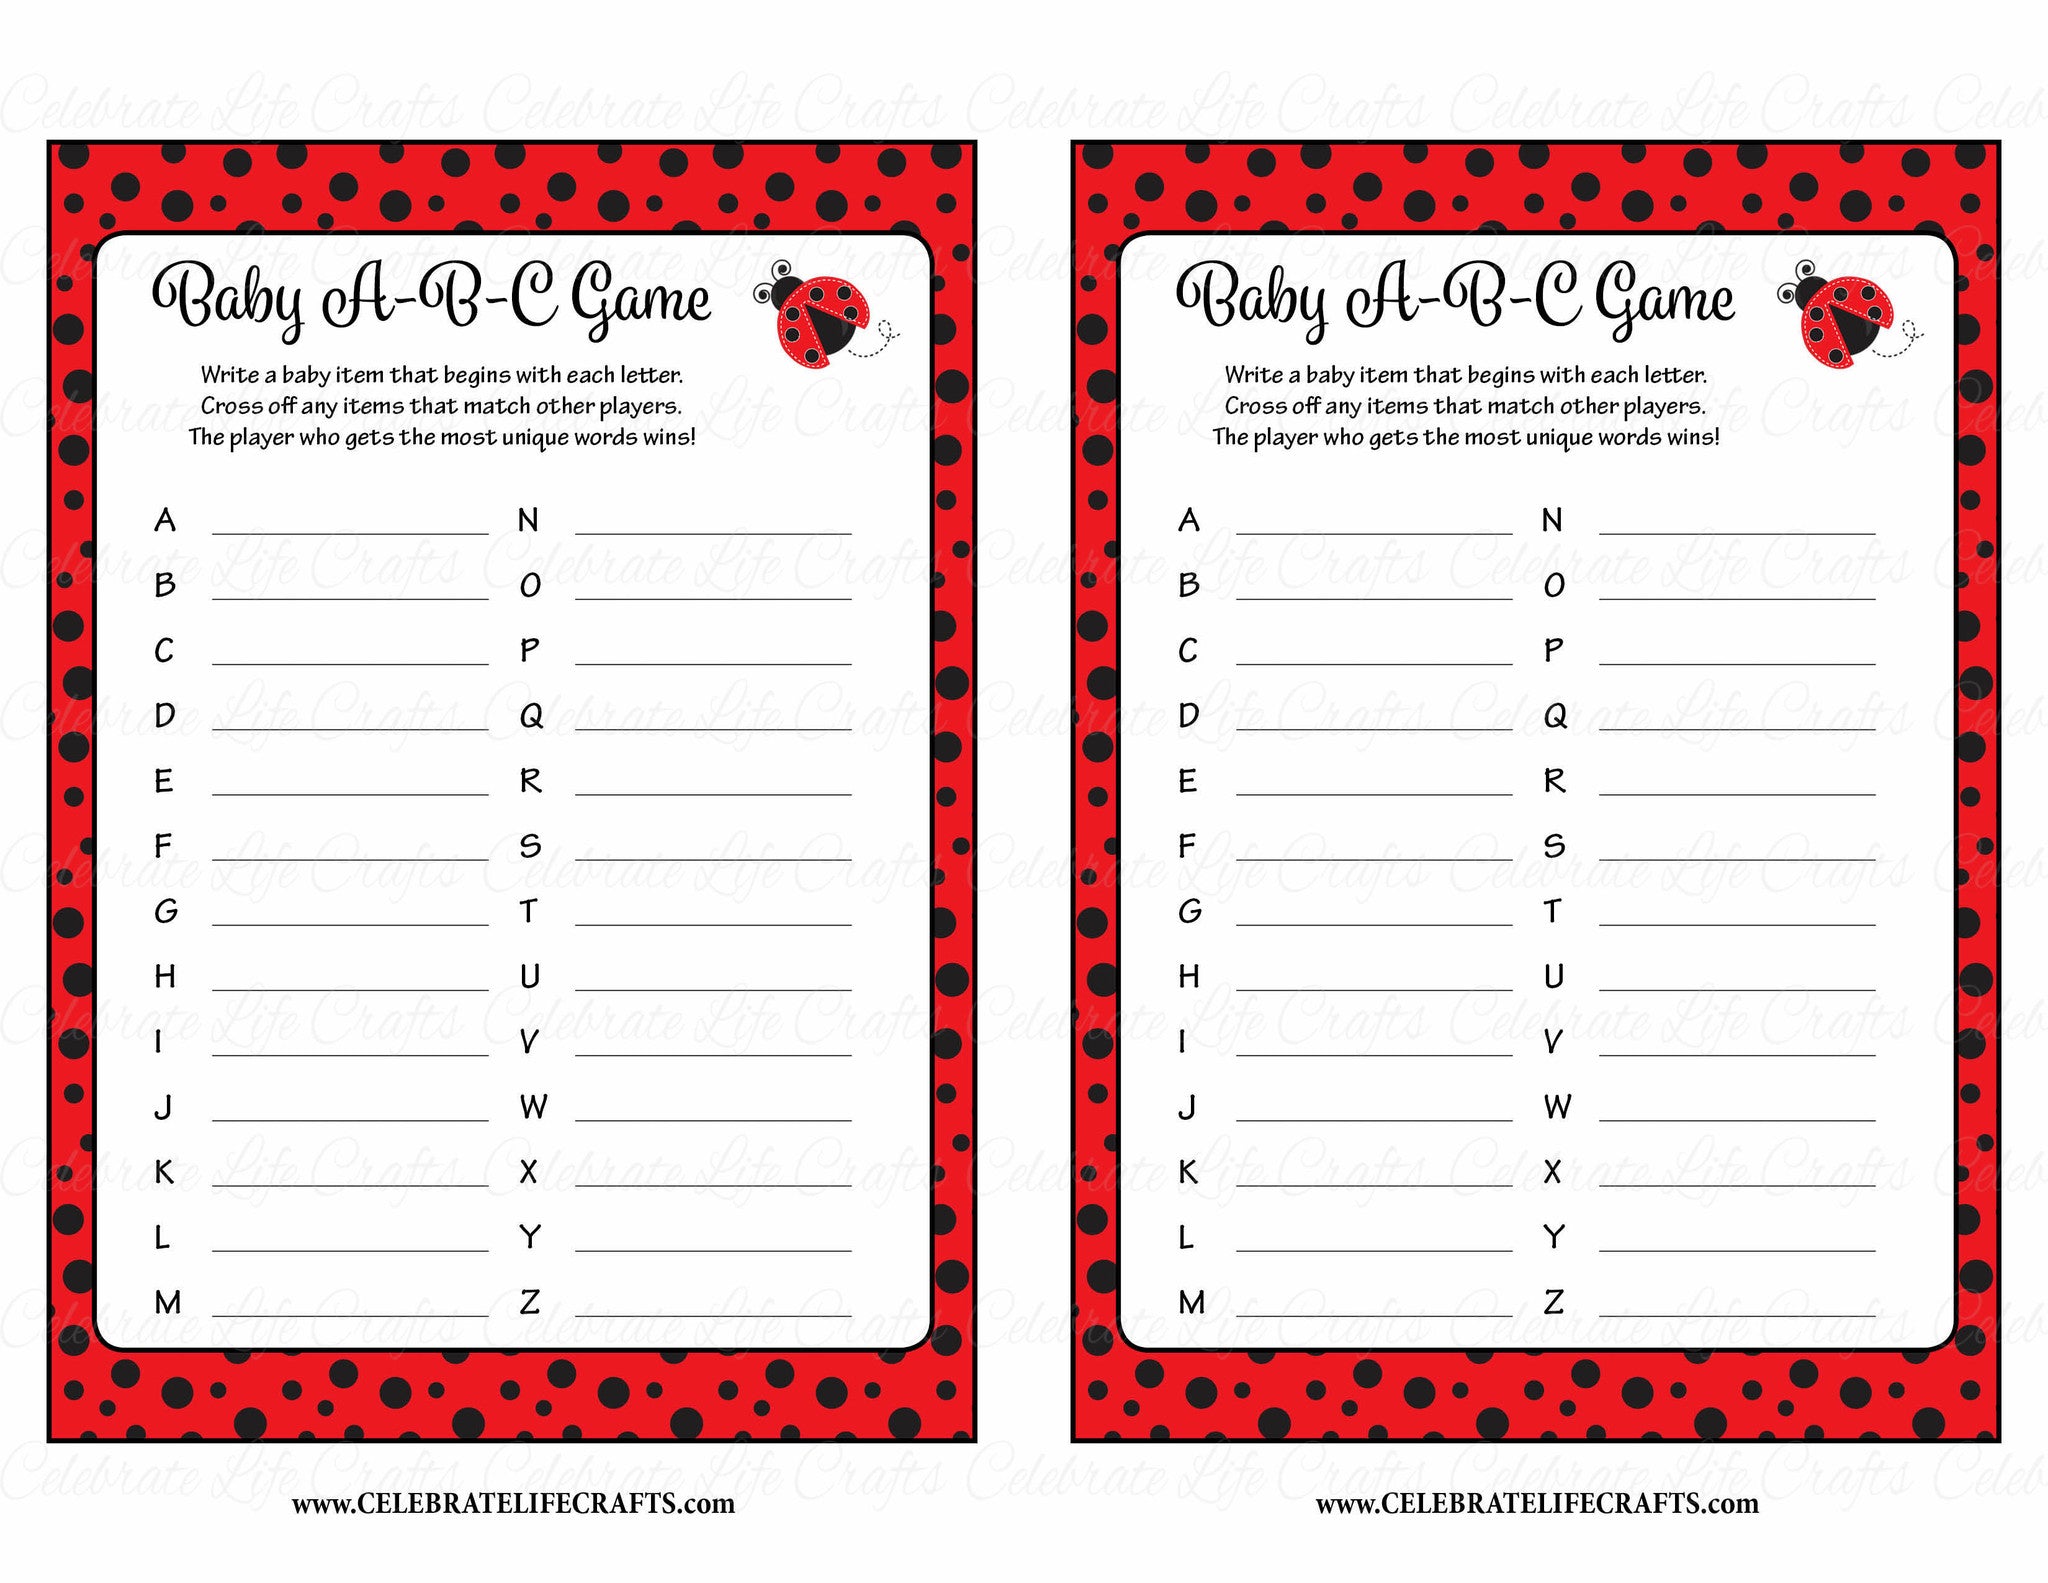 baby-abc-s-baby-shower-game-ladybug-baby-shower-theme-for-baby-girl